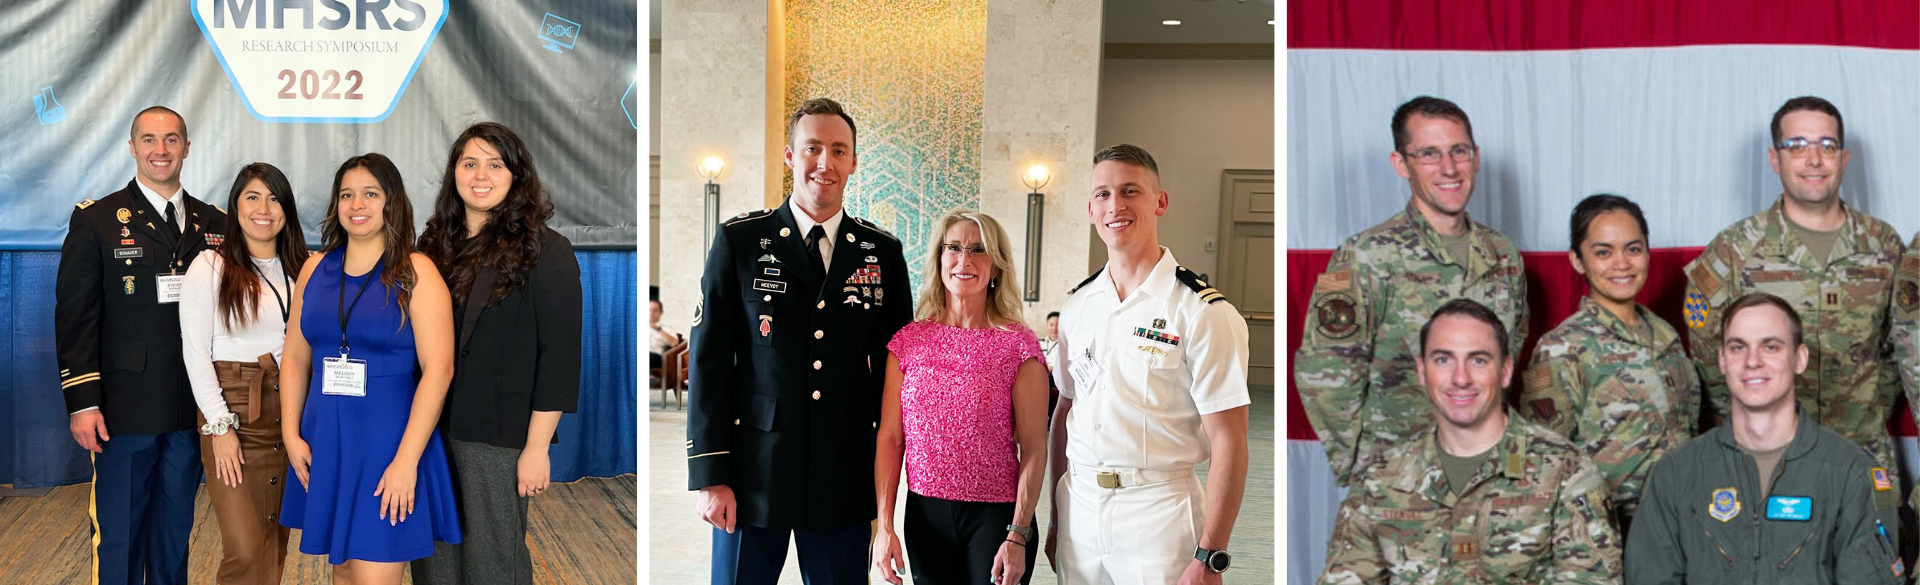 Three photos of portraits of featured students and mentors. From left to right, Steve Schauer, with his research team; Ian Eisenhauer with two COMBAT collaborators; Raiza Deyto with her U.S. Army squadron.